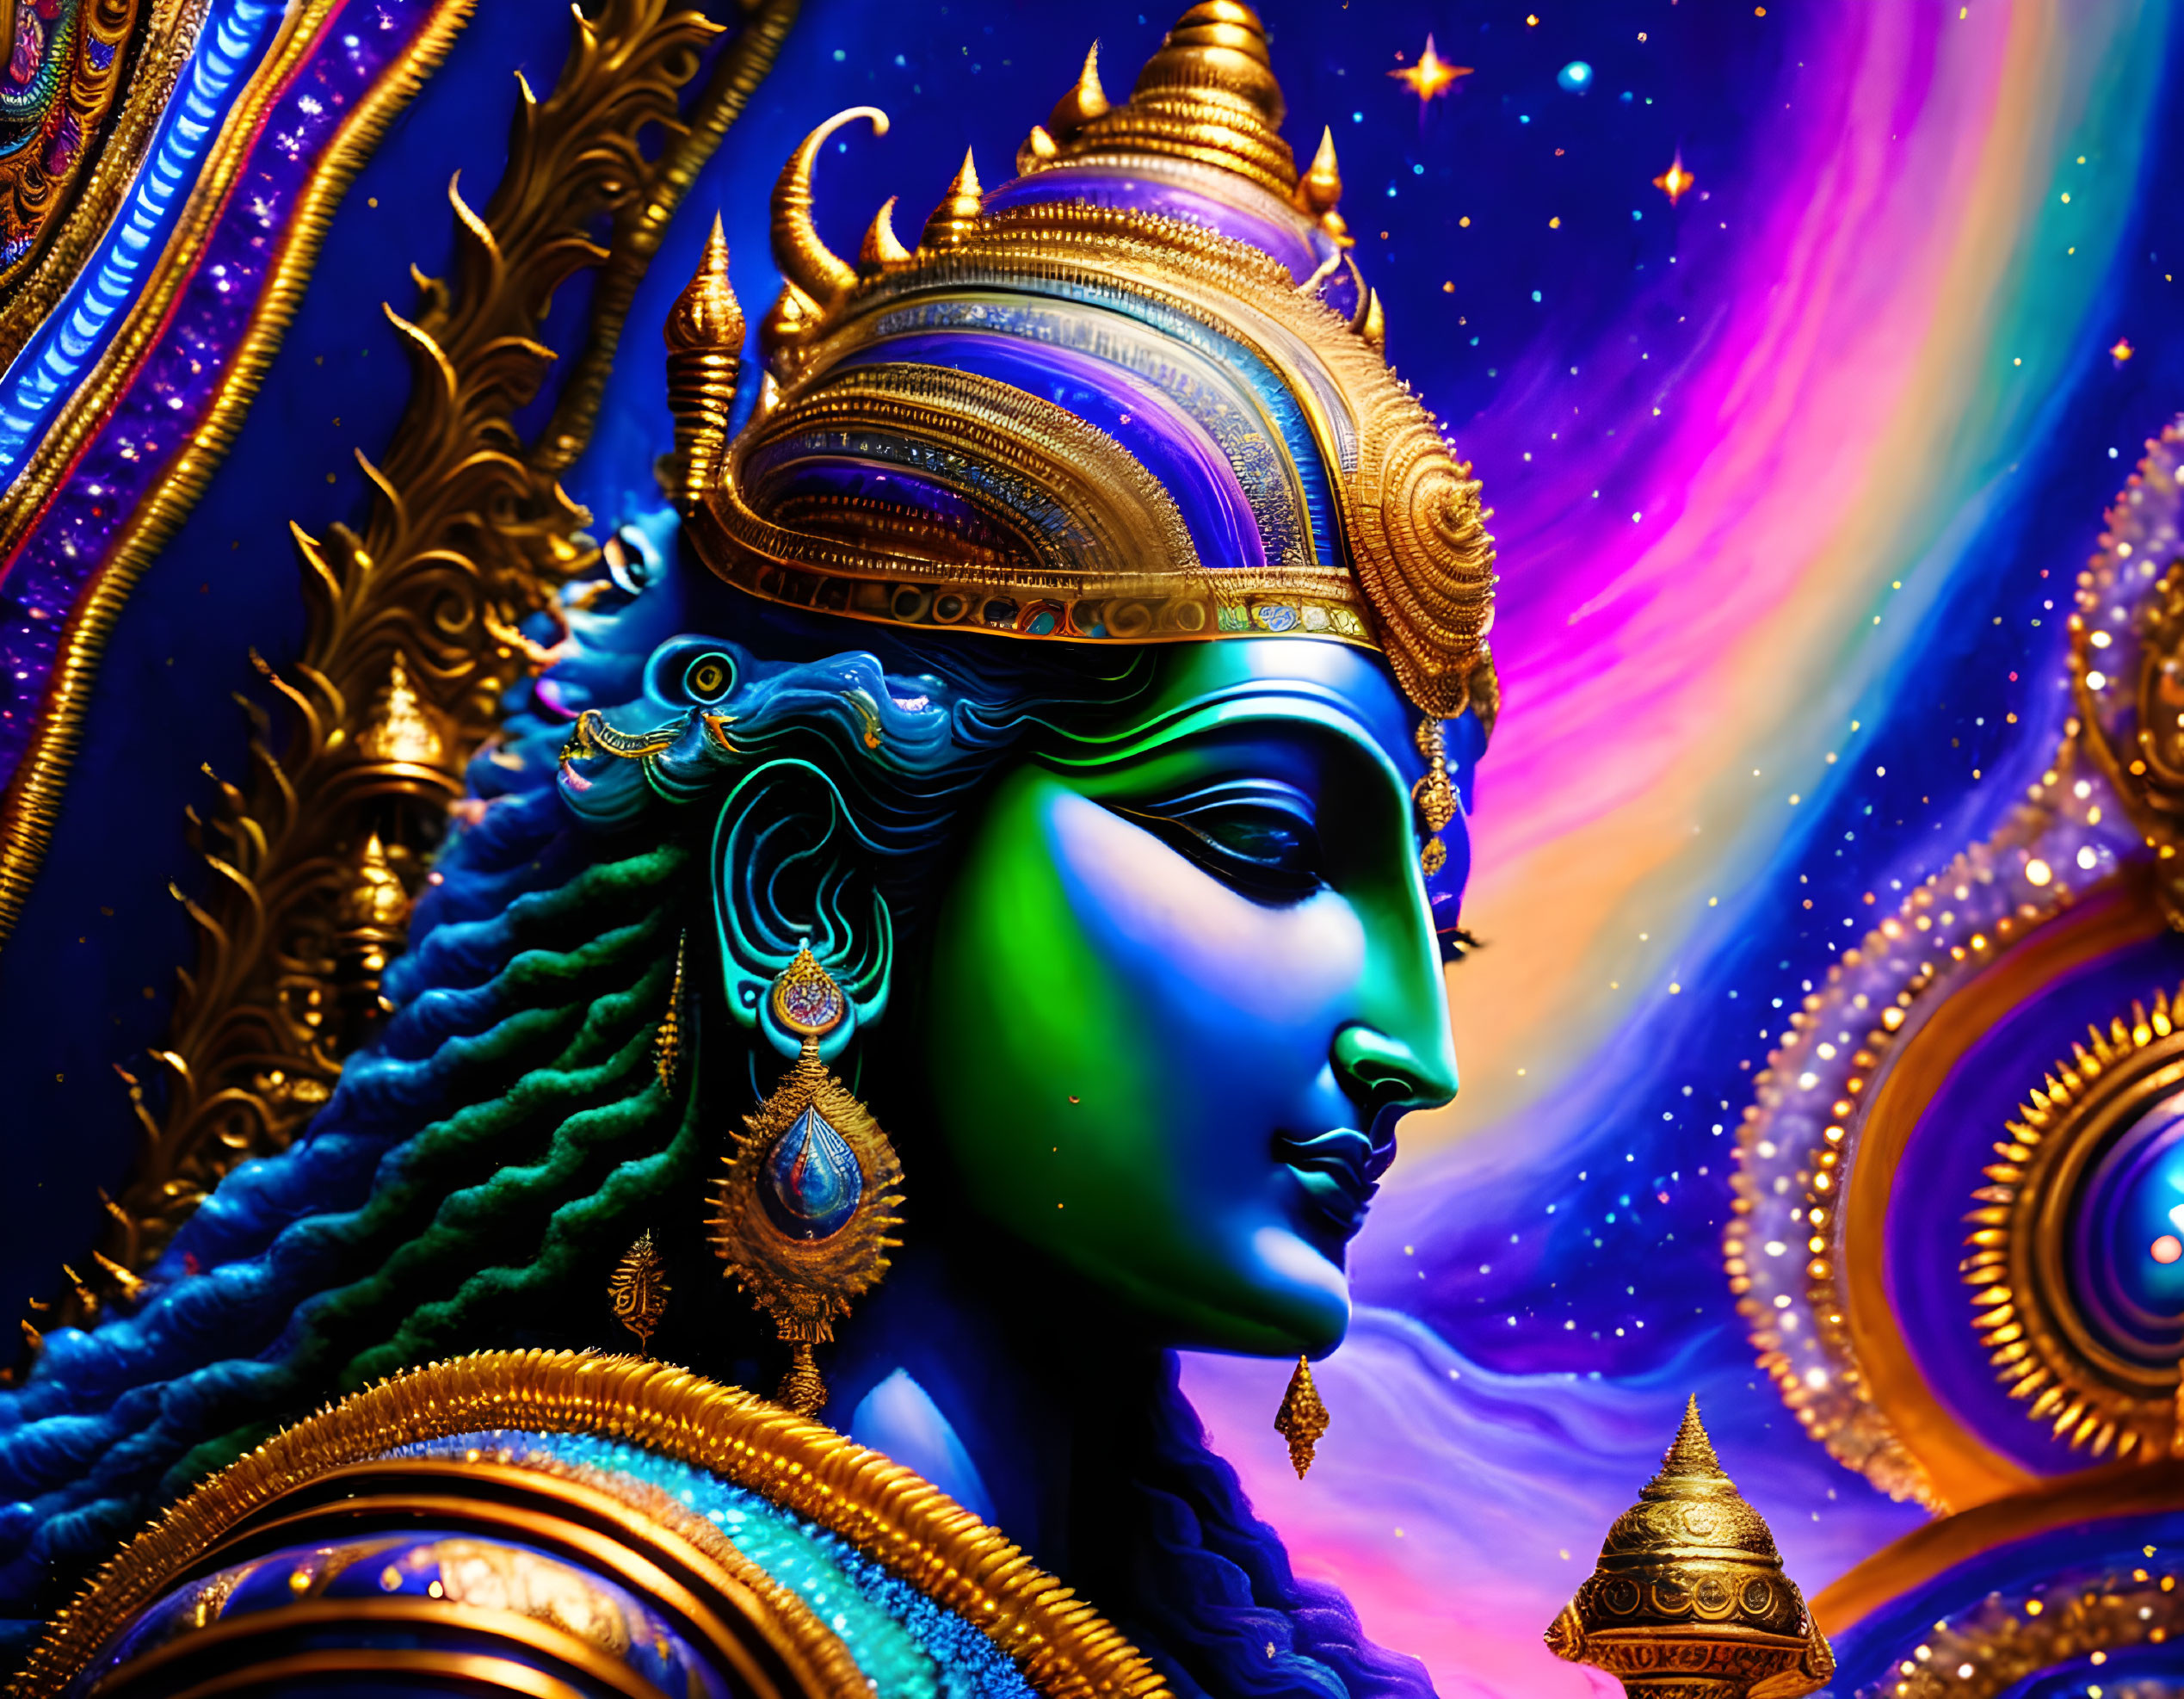 Colorful Hindu Deity Artwork with Blue Skin and Cosmic Background